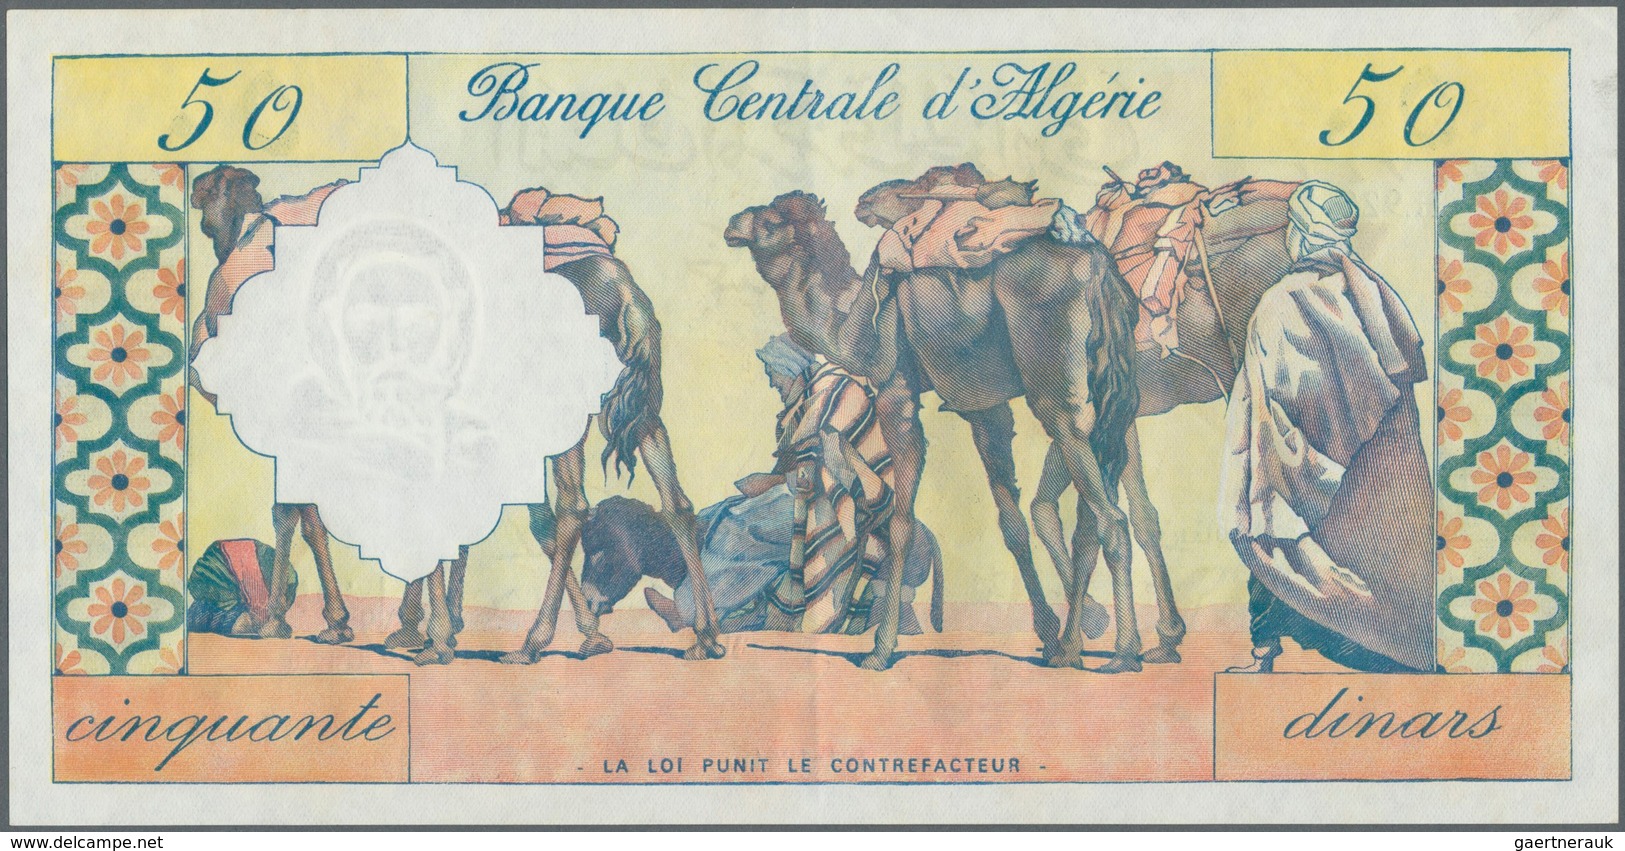 Africa / Afrika: Collectors book with 117 Banknotes from Egypt, Algeria, Ethiopia and Angola compris